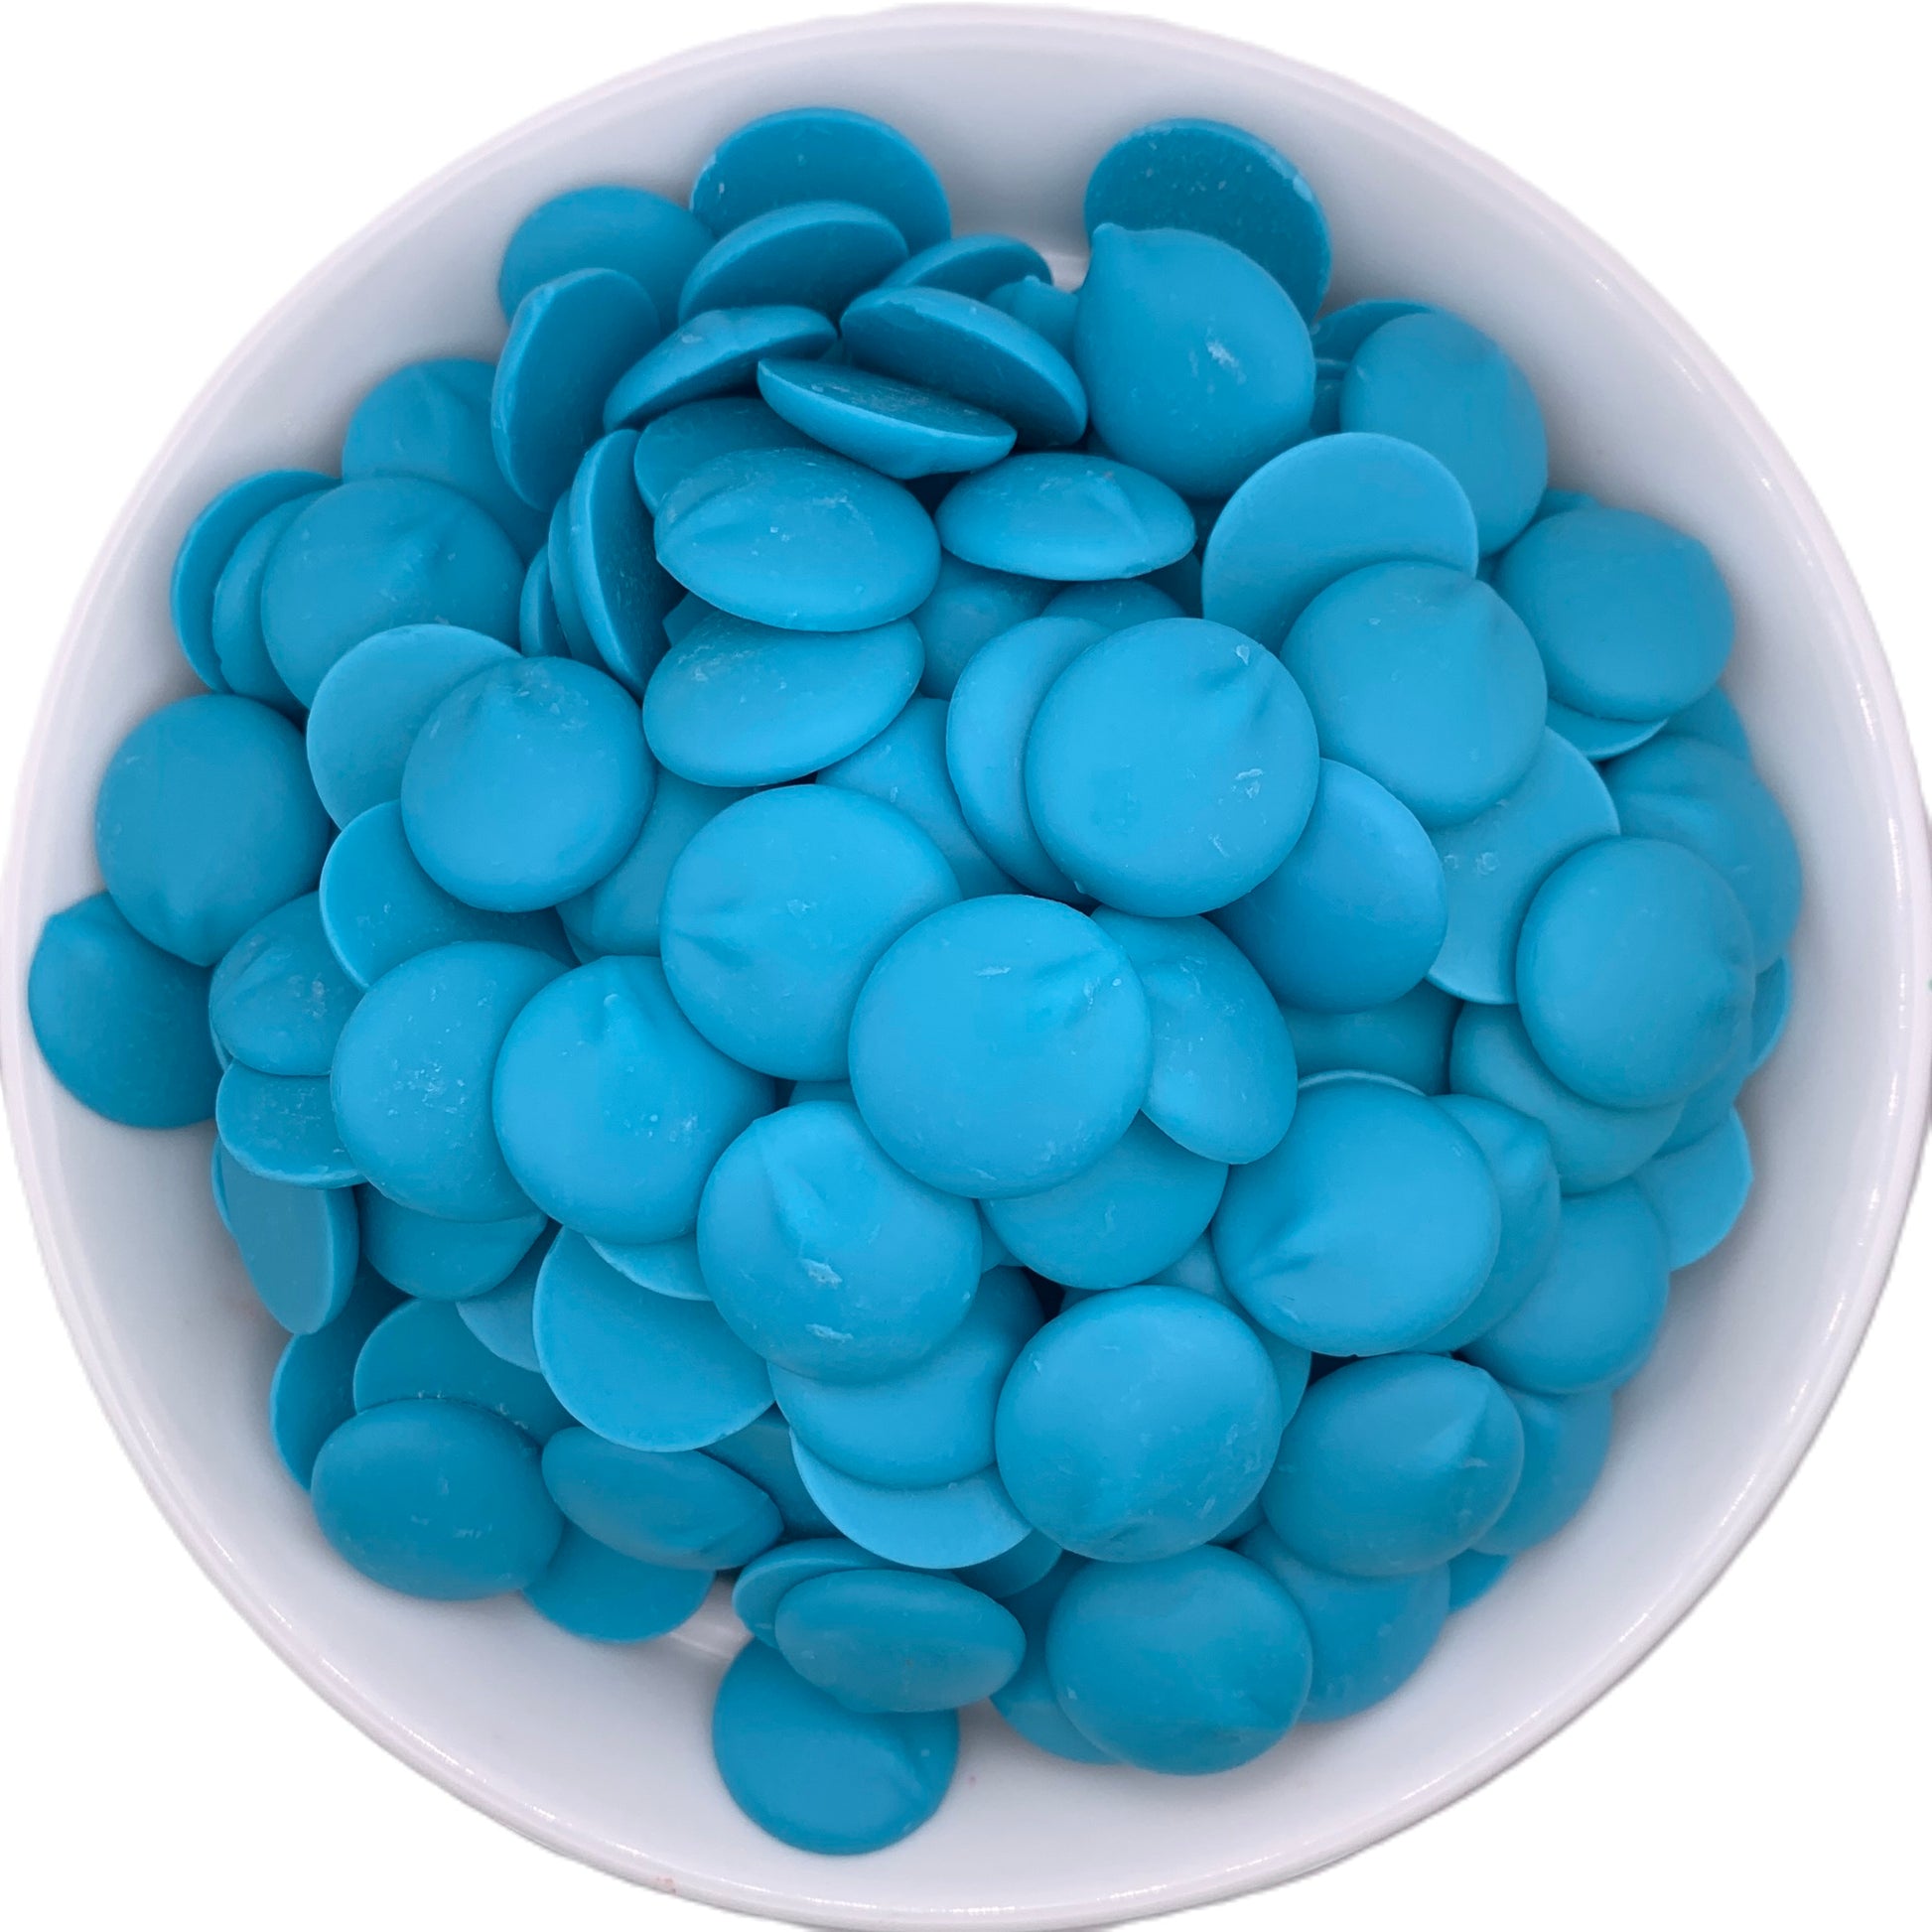 Overhead view of a white bowl filled with Merckens blue chocolate melting wafers, showing a bright sky blue color, perfect for creating ocean-themed treats or adding a splash of color to party confections.